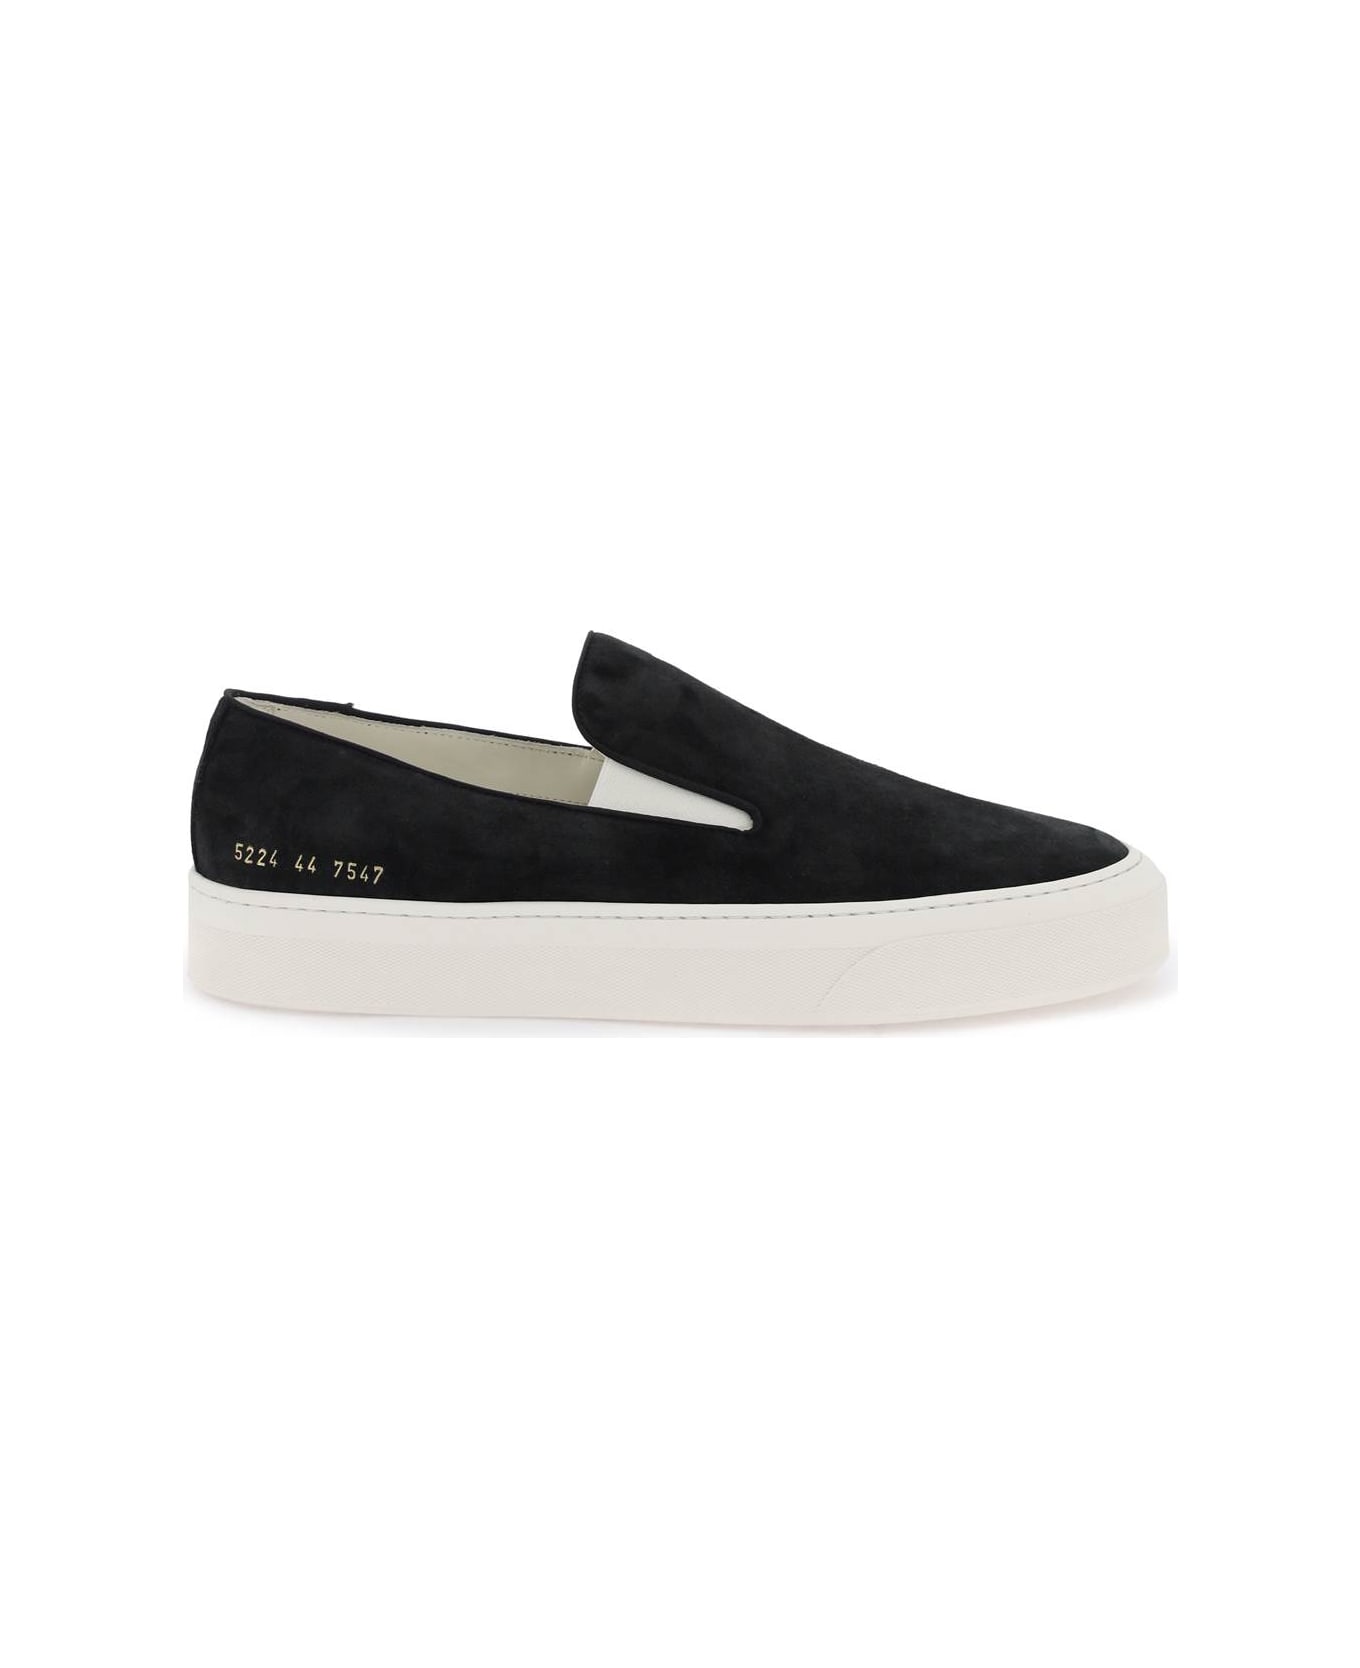 Common Projects Sneakers - BLACK (Black) スニーカー